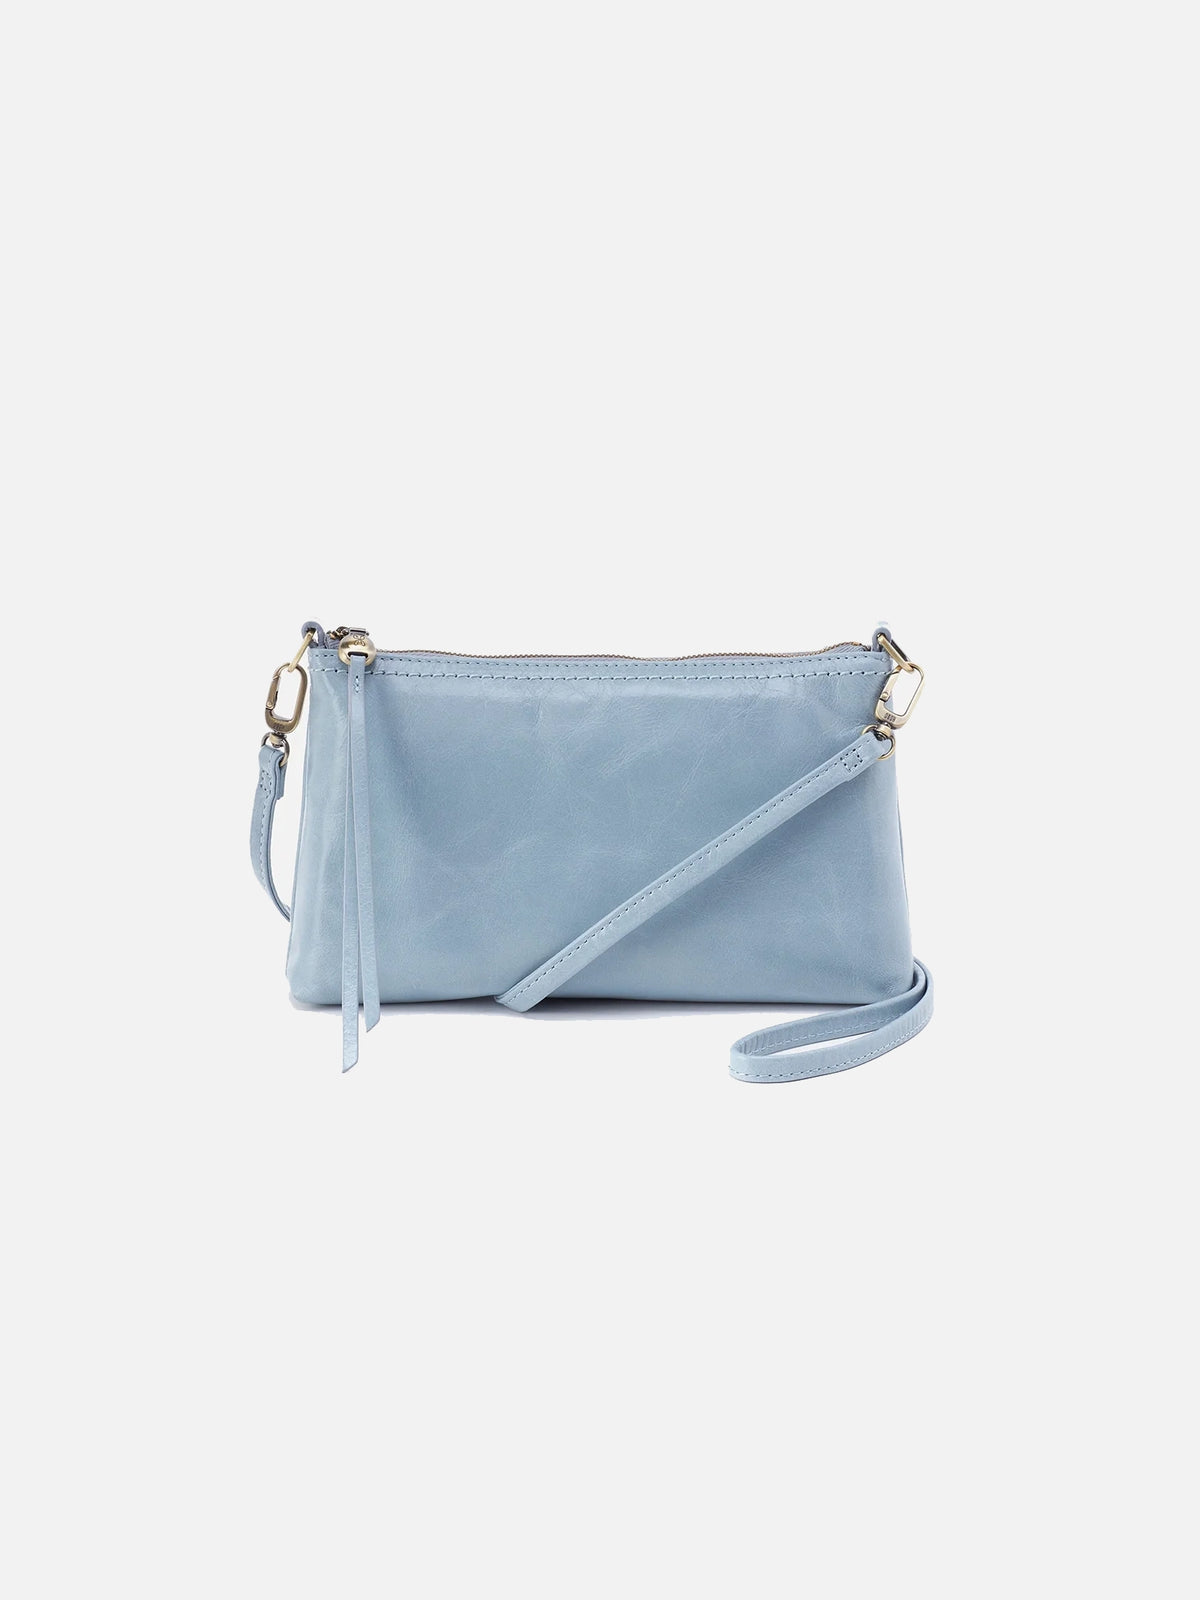 hobo darcy convertible 3-way crossbody bag in light blue cornflower polished leather